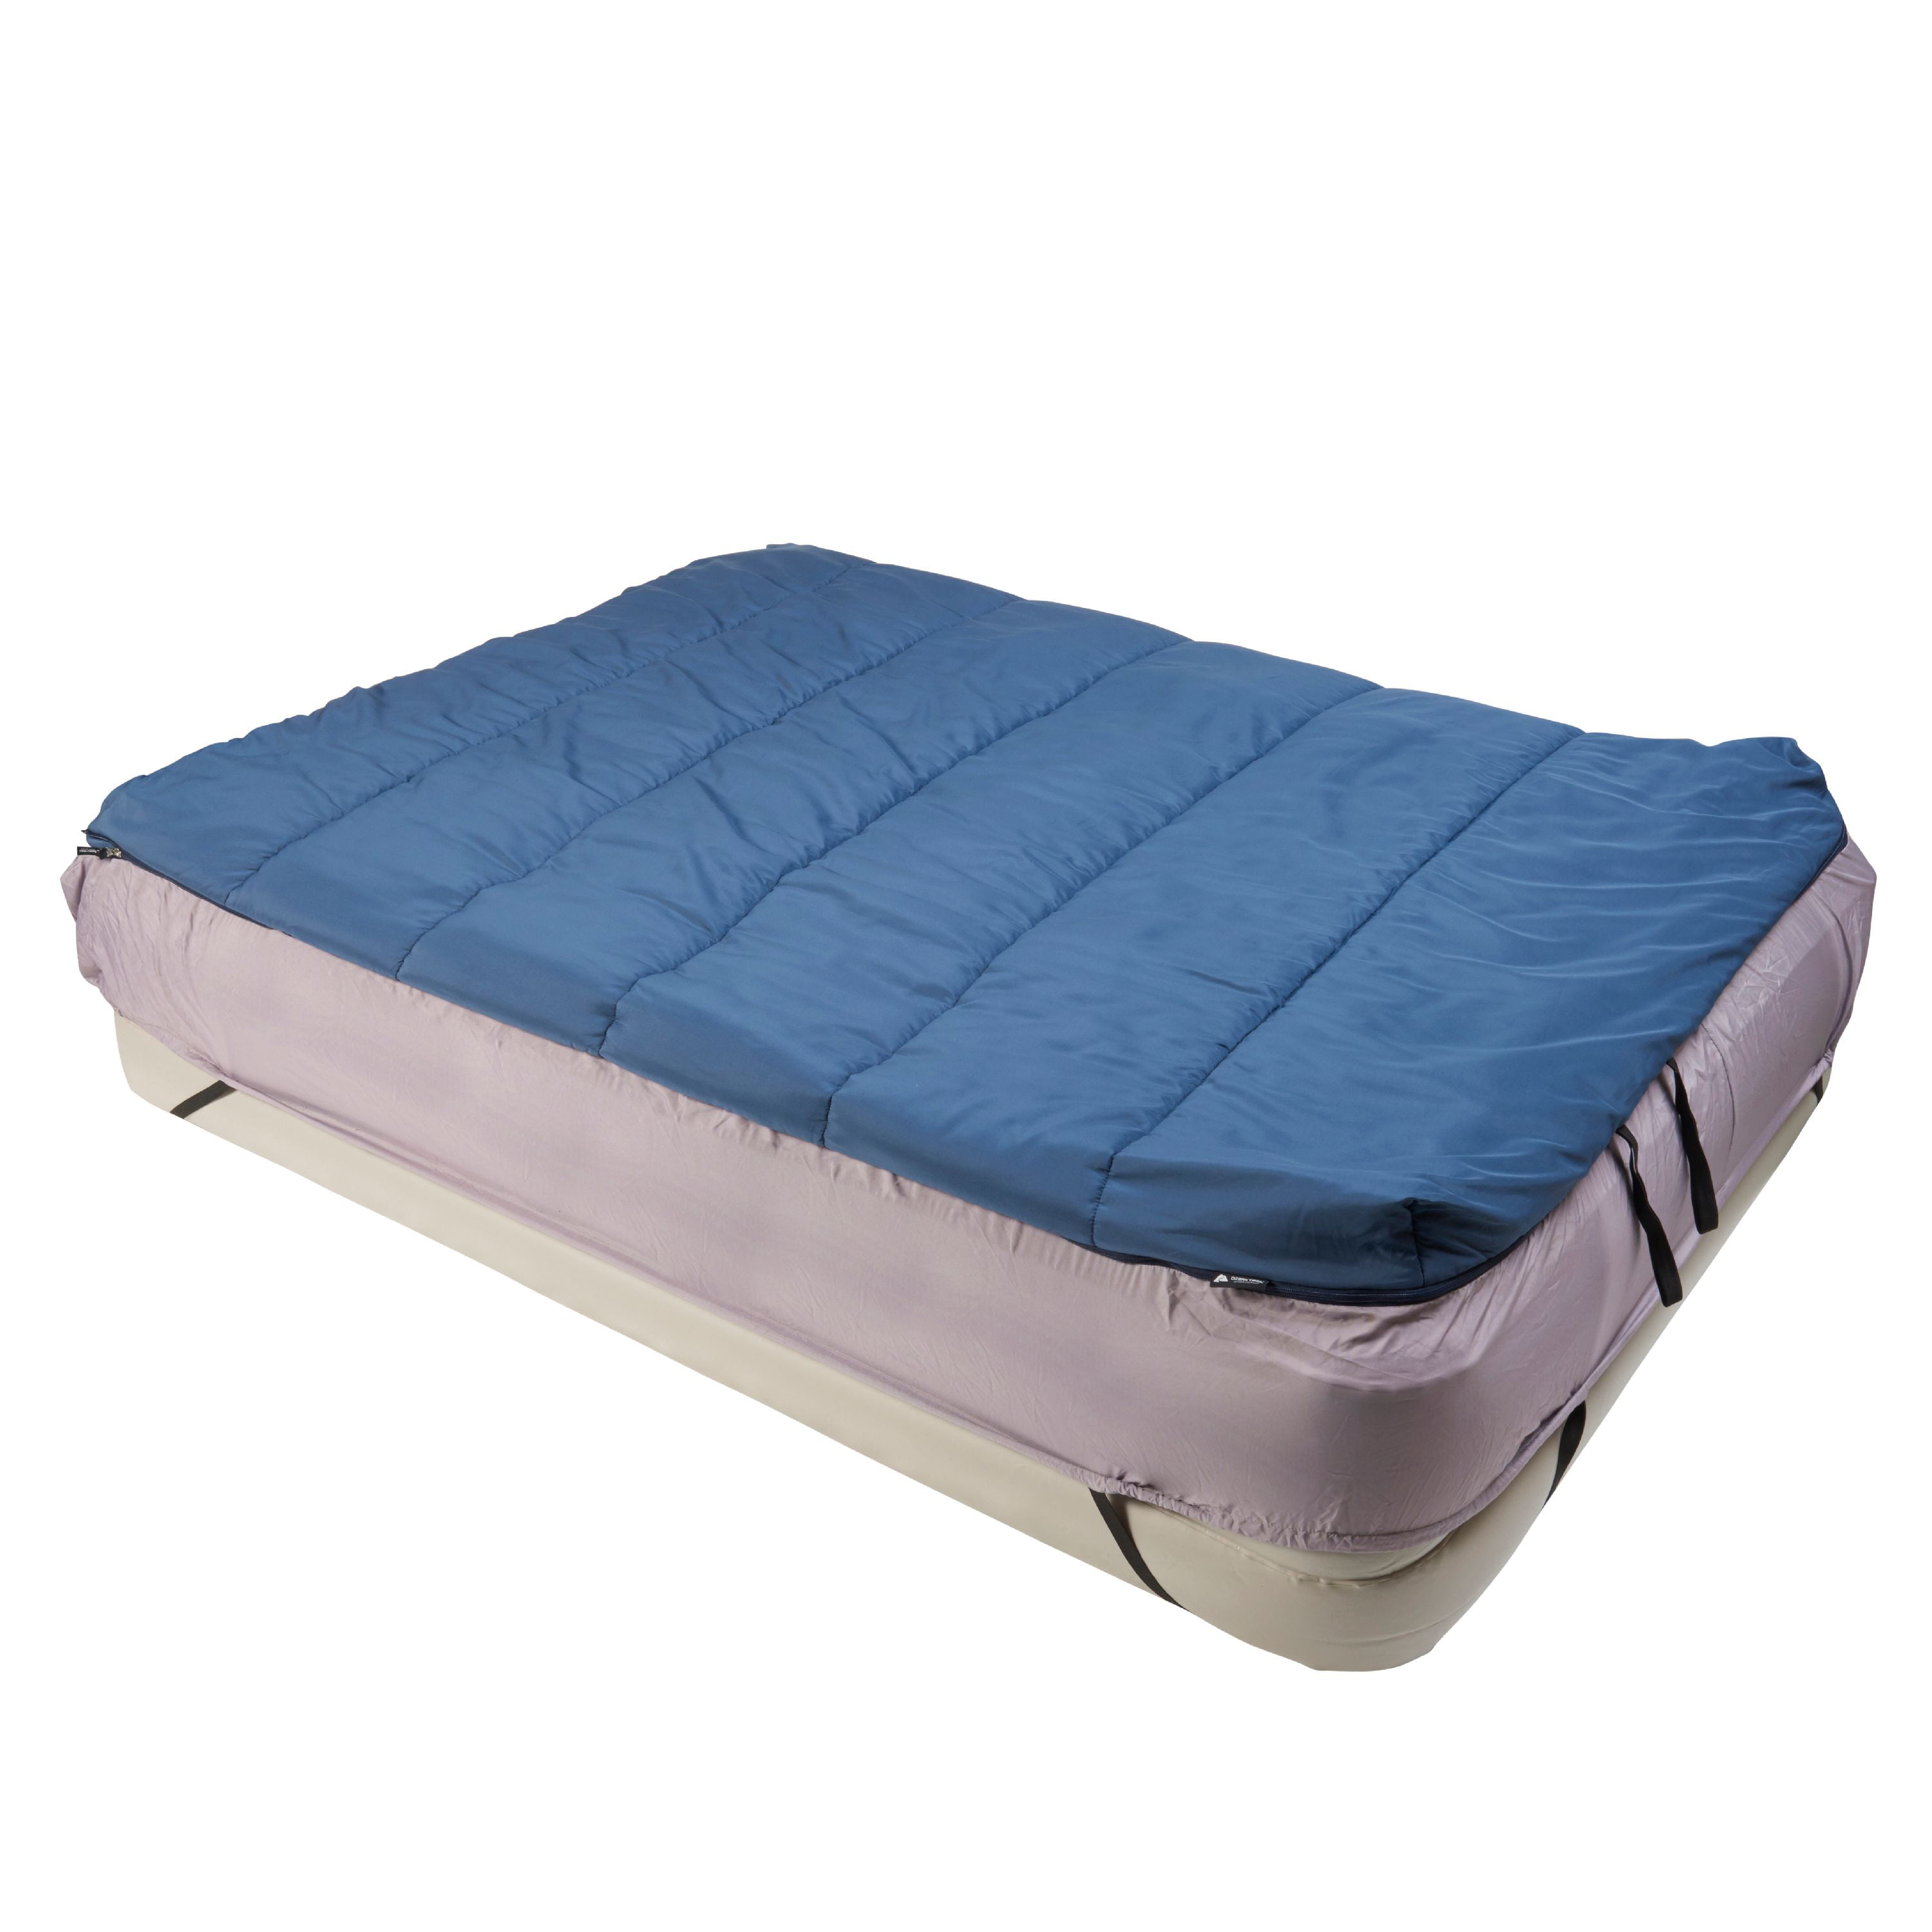 SLEEPING BAG-AIR BED COVER- SINGLE(L) / DOUBLE(L)